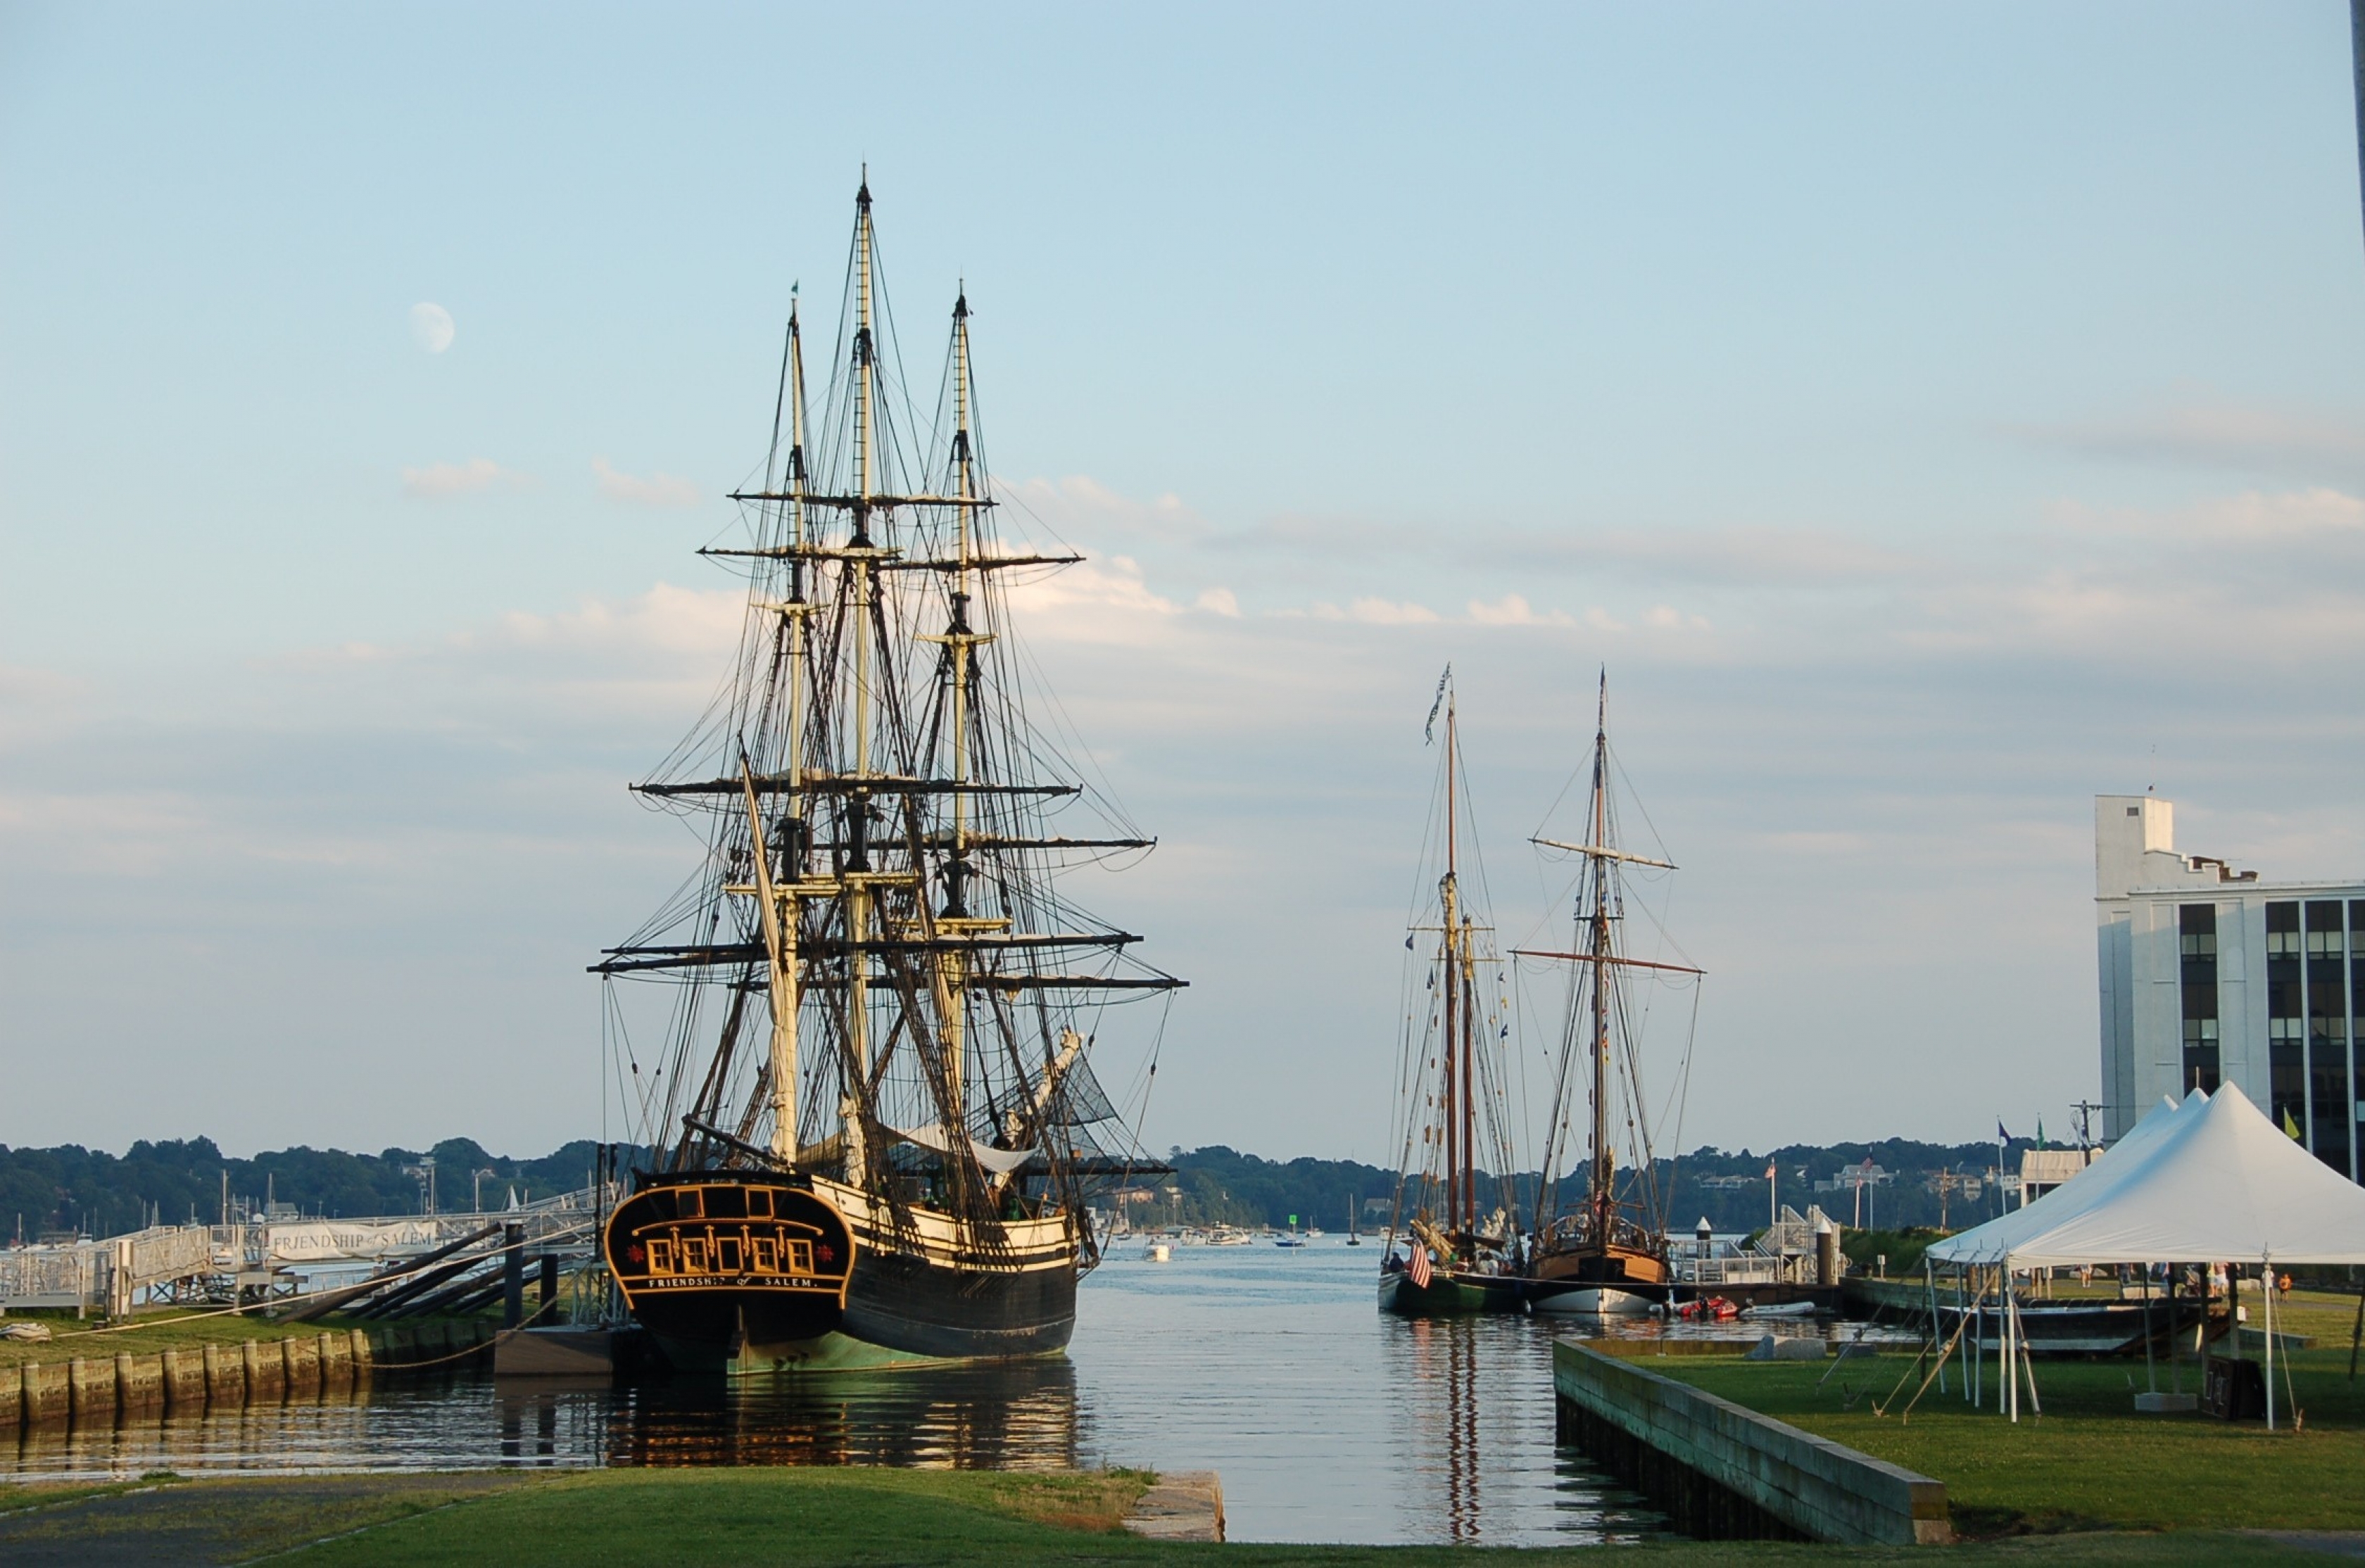 The Friendship of Salem (wooden, 171-foot three-masted boat) anchored in the harbor of Salem Maritime National Historic Park